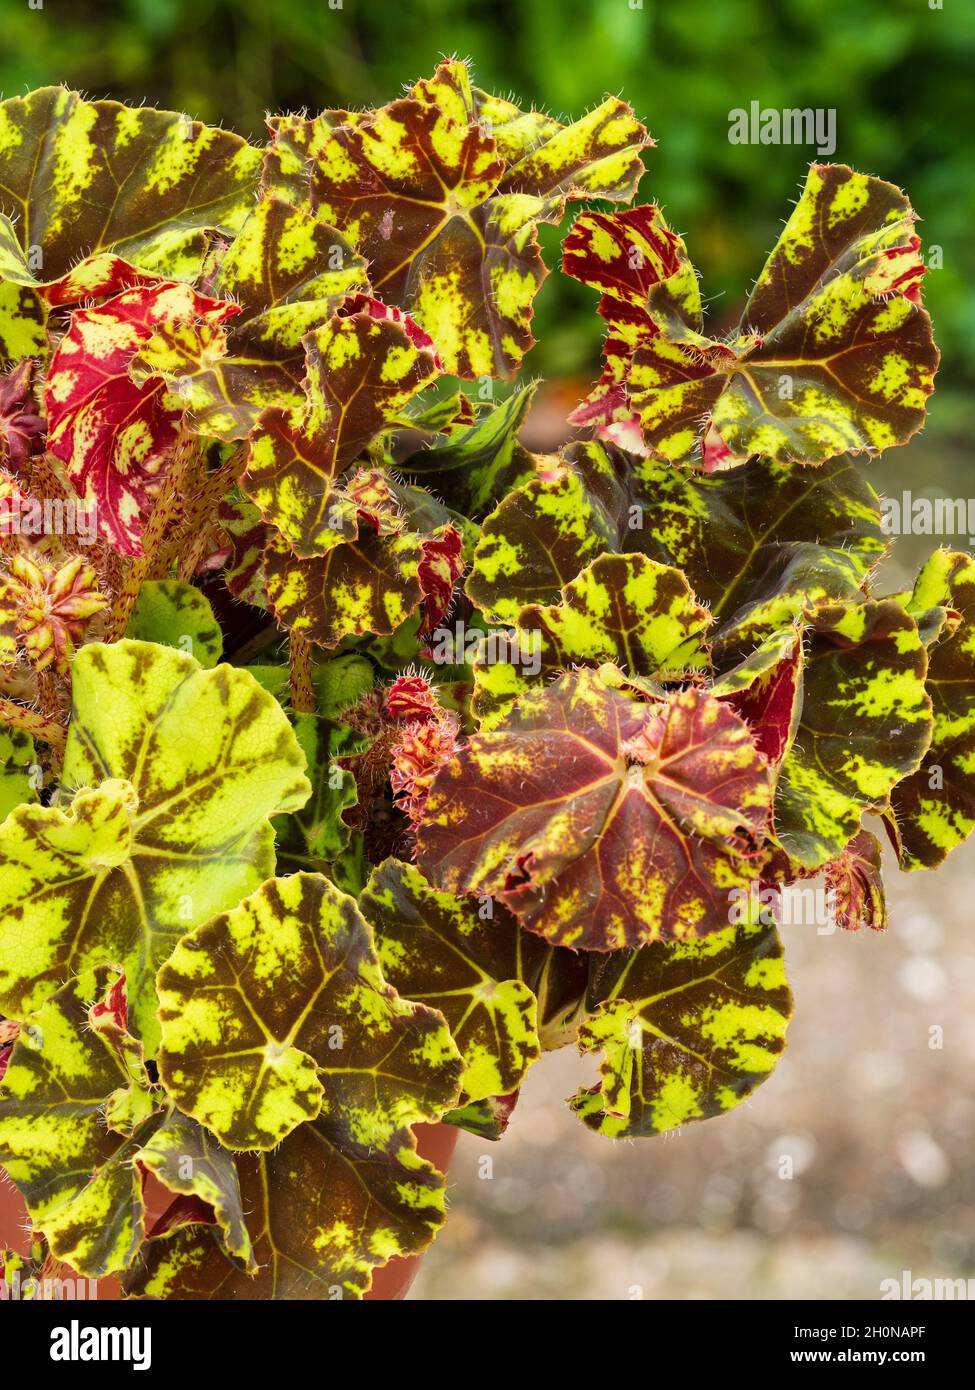 Patterned yellow and brown foliage of the tender rex type houseplant begonia, Begonia 'Zumba' Stock Photo